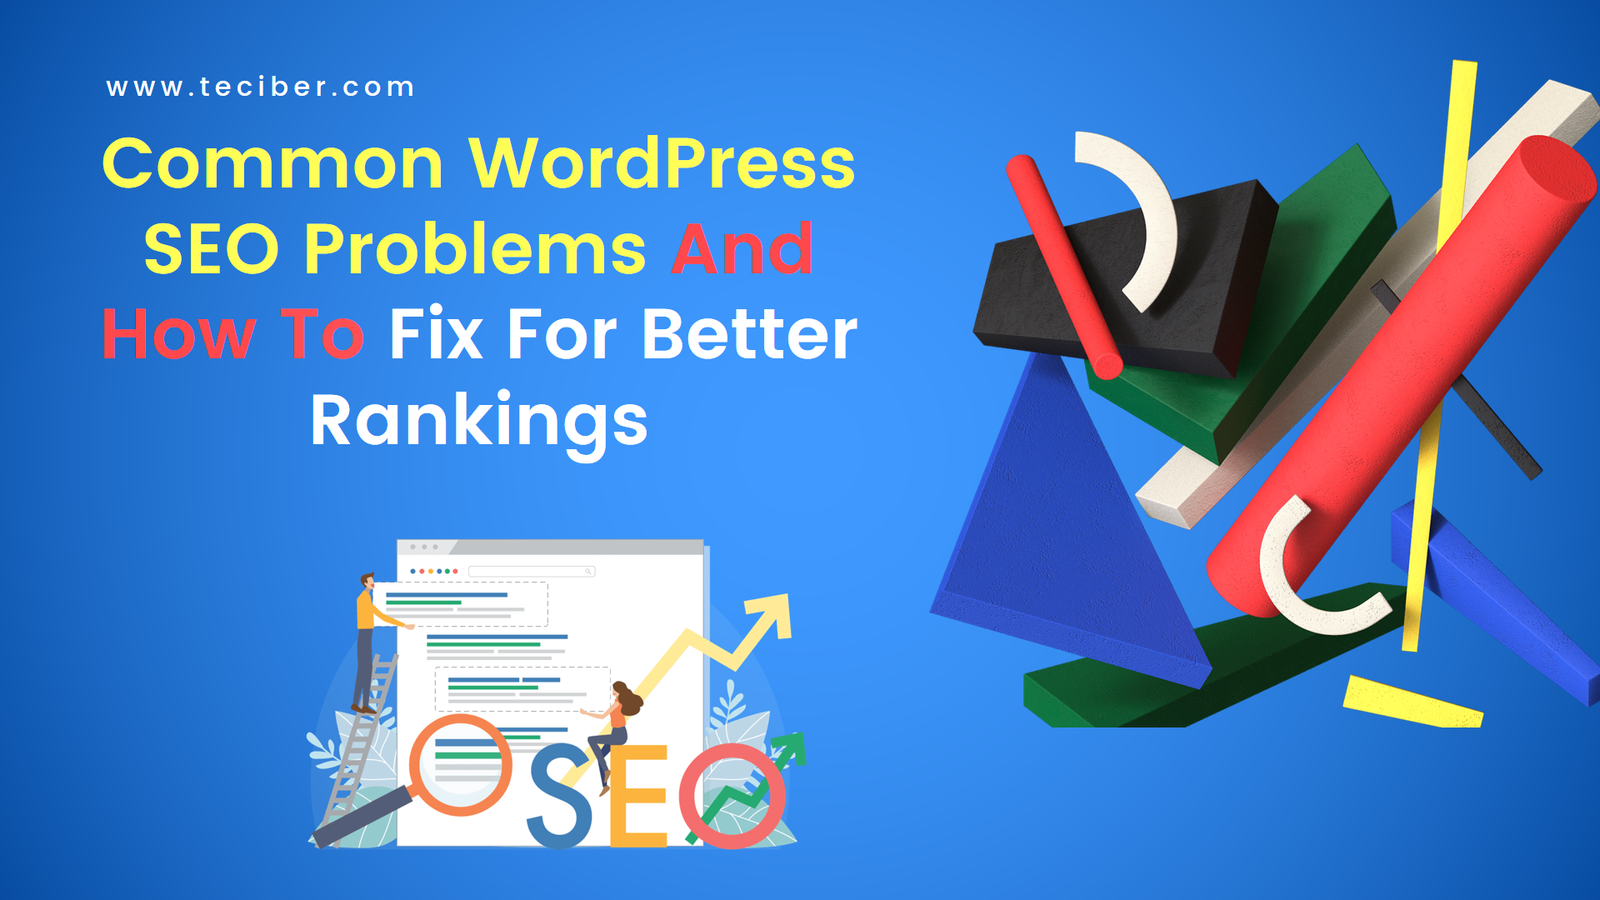 Common WordPress SEO Problems And How To Fix For Better Rankings